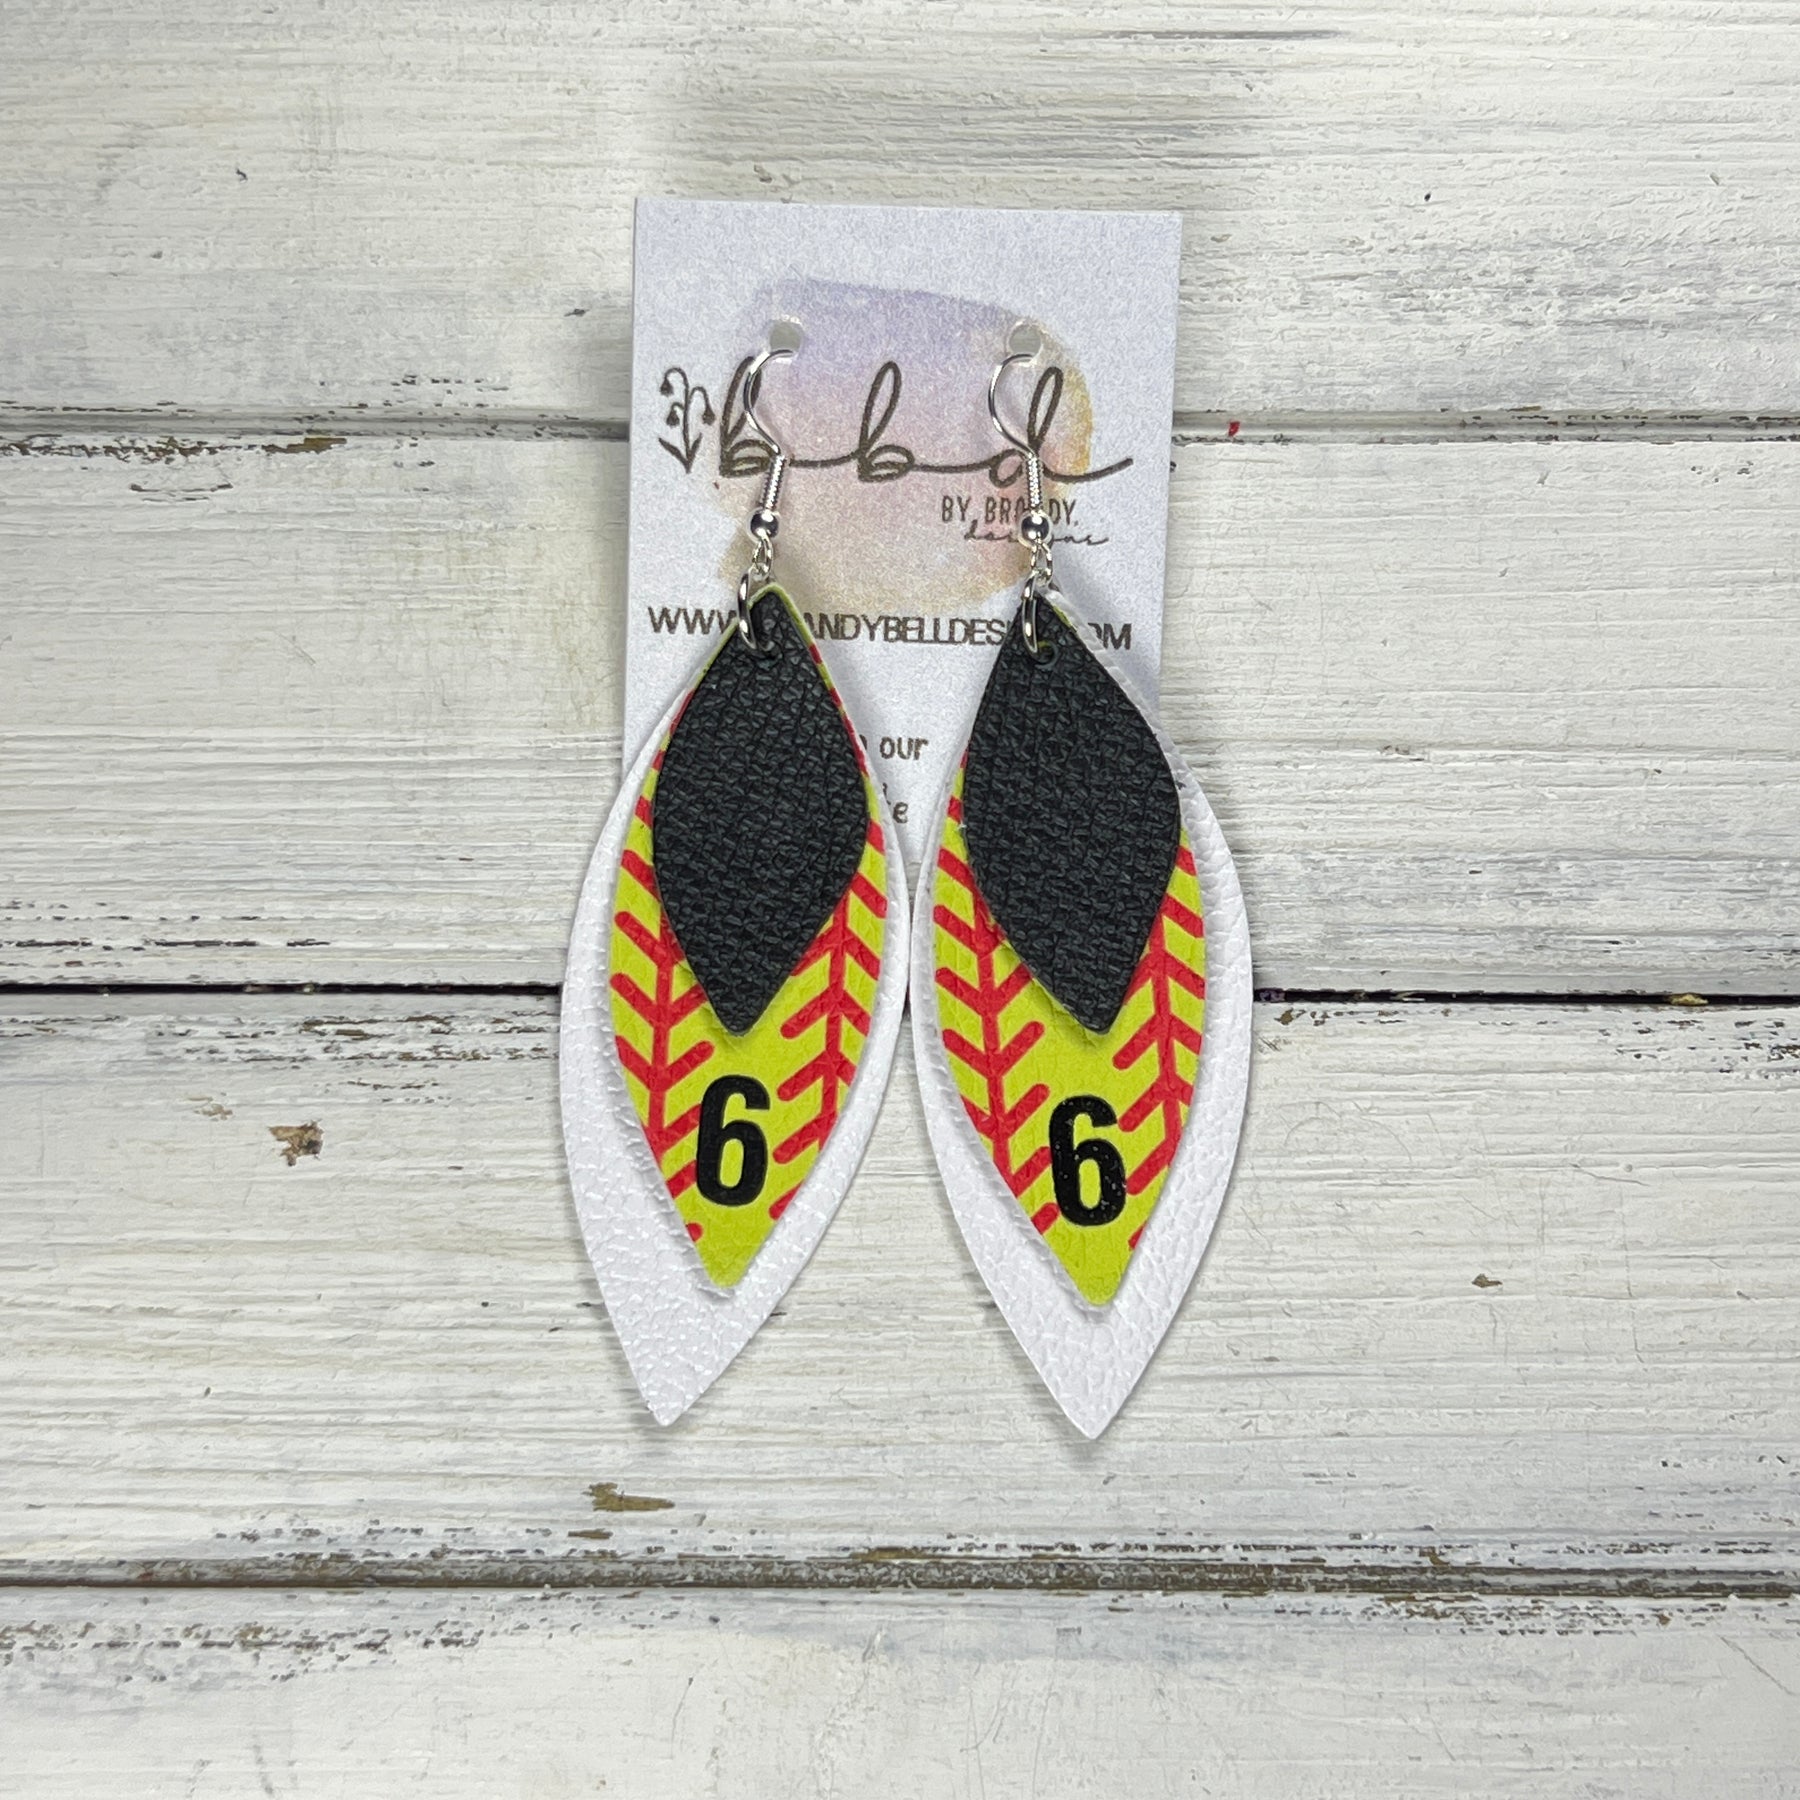 Discover 159+ leather earrings diy latest